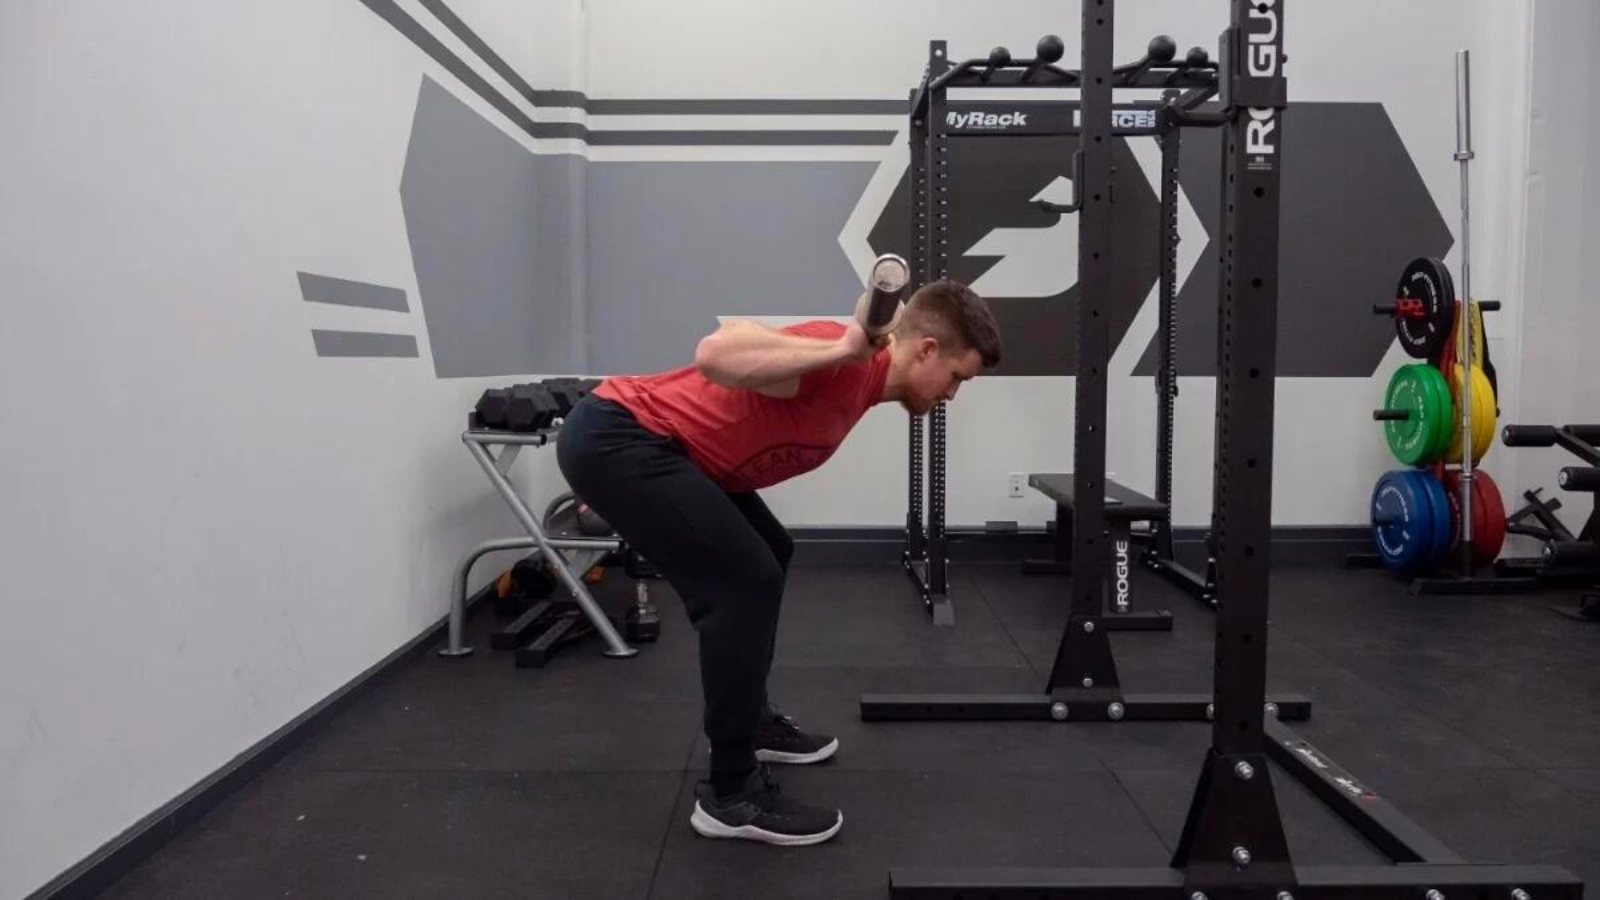 A rounded back is just as efficient and safe as a straight posture and bent  knees when heavy lifting